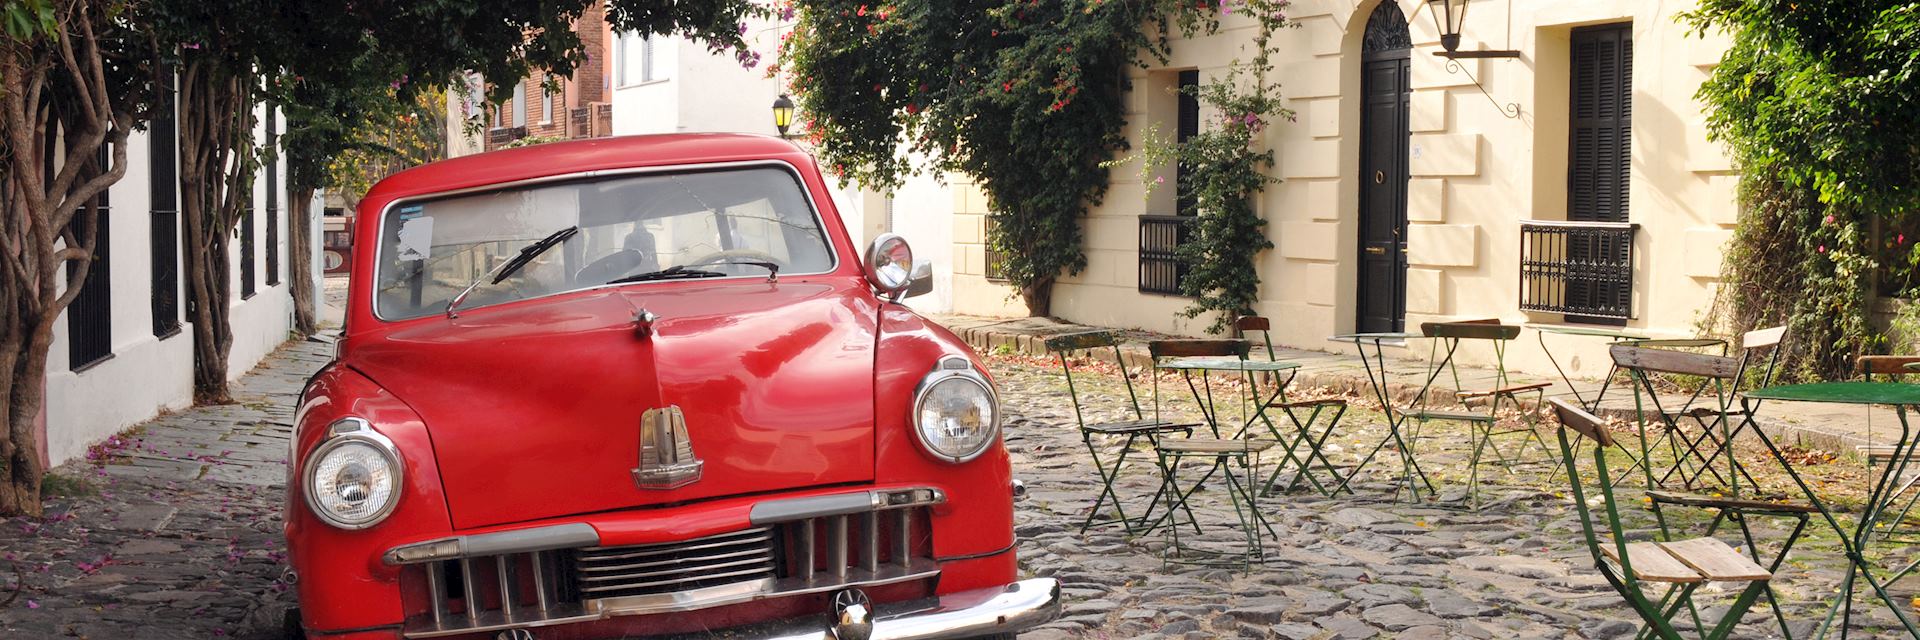 1950s car on one of Uruguay's cobbled streets